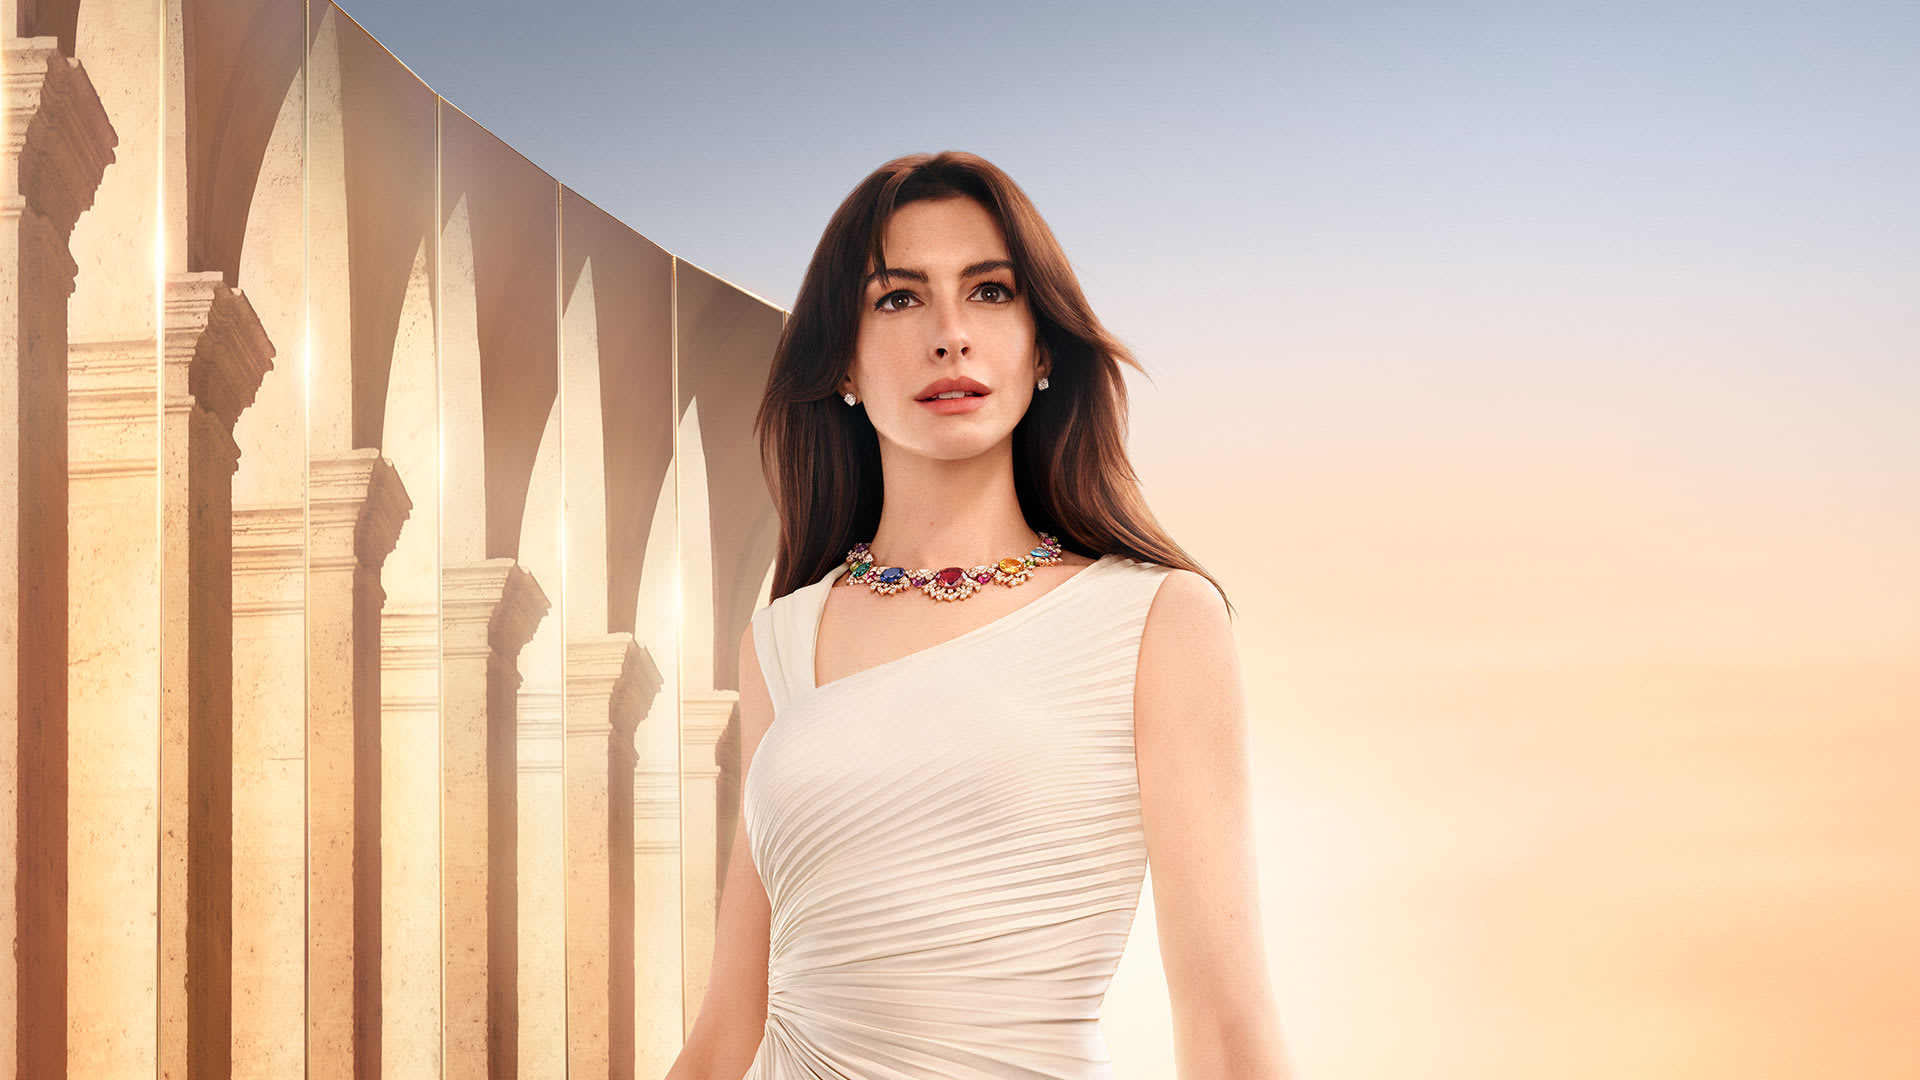 Anne Hathaway wearing a High Jewellery necklace for the Bvlgari Brand Campaign, a Roman monument in the back, the sky at dawn. 